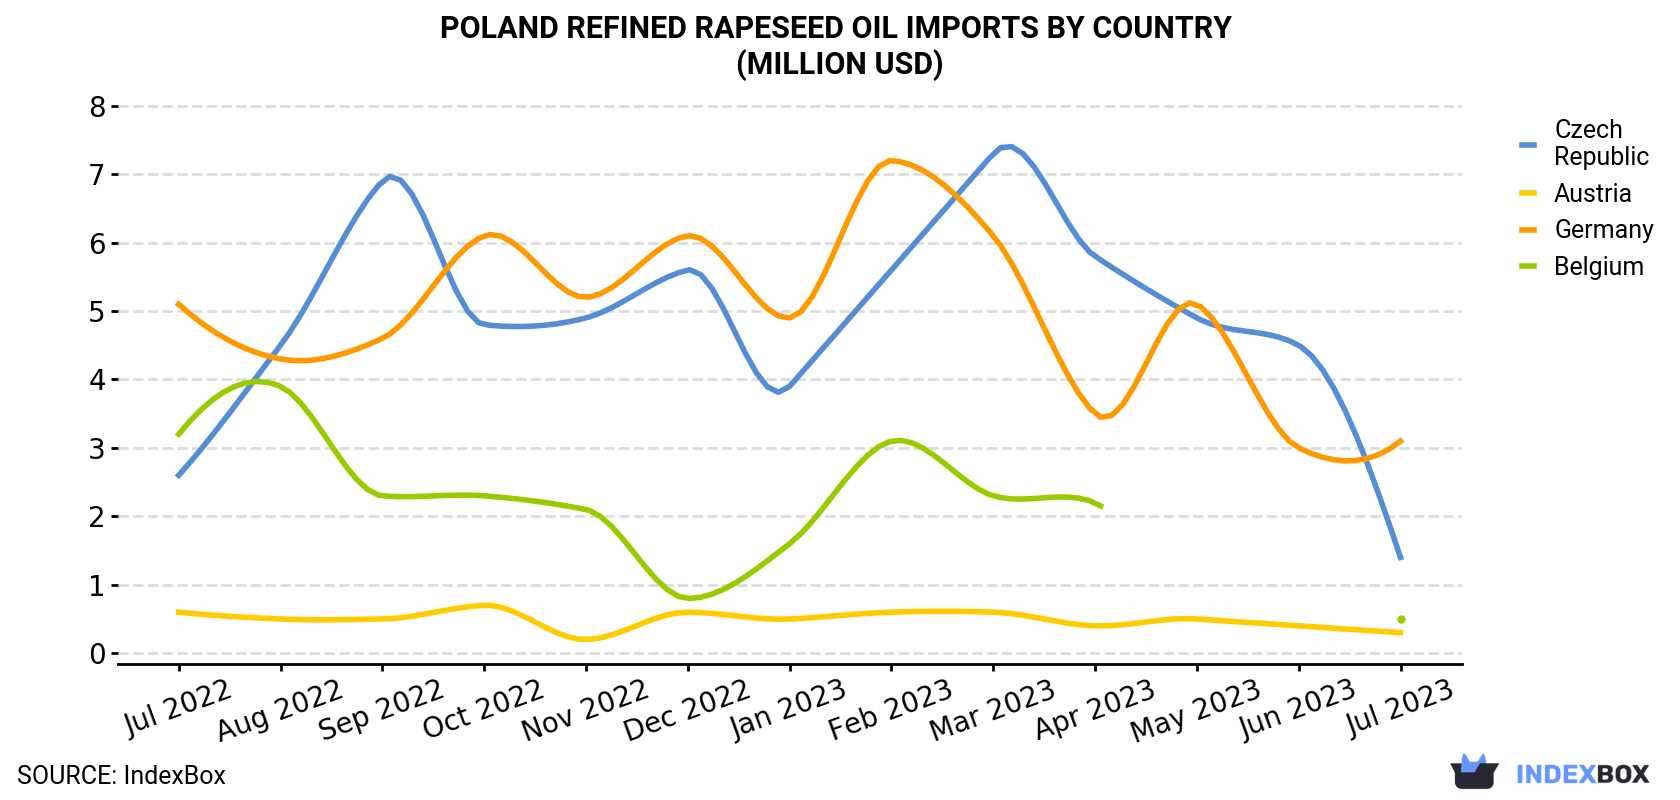 Poland Refined Rapeseed Oil Imports By Country (Million USD)